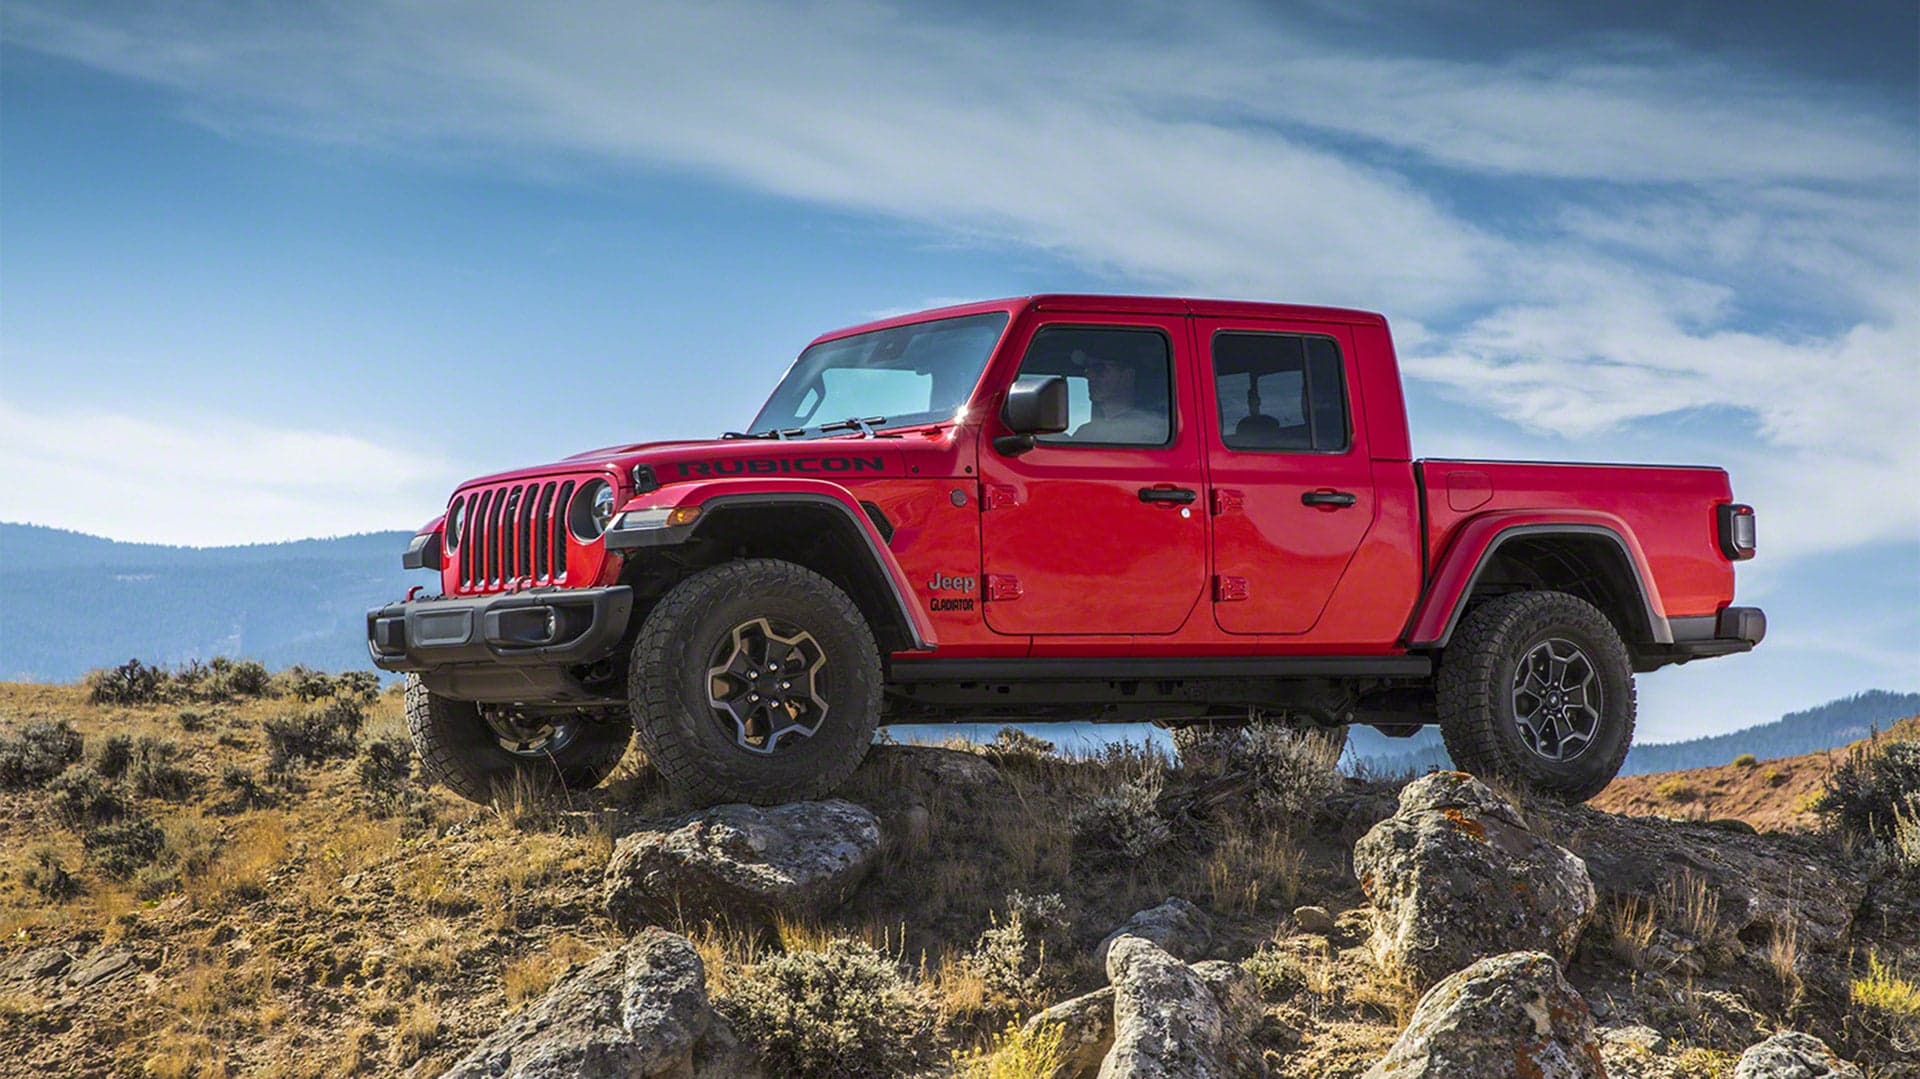 2020 Jeep Gladiator Pickup Truck Costs Less to Lease Per Month Than Your Morning Coffee